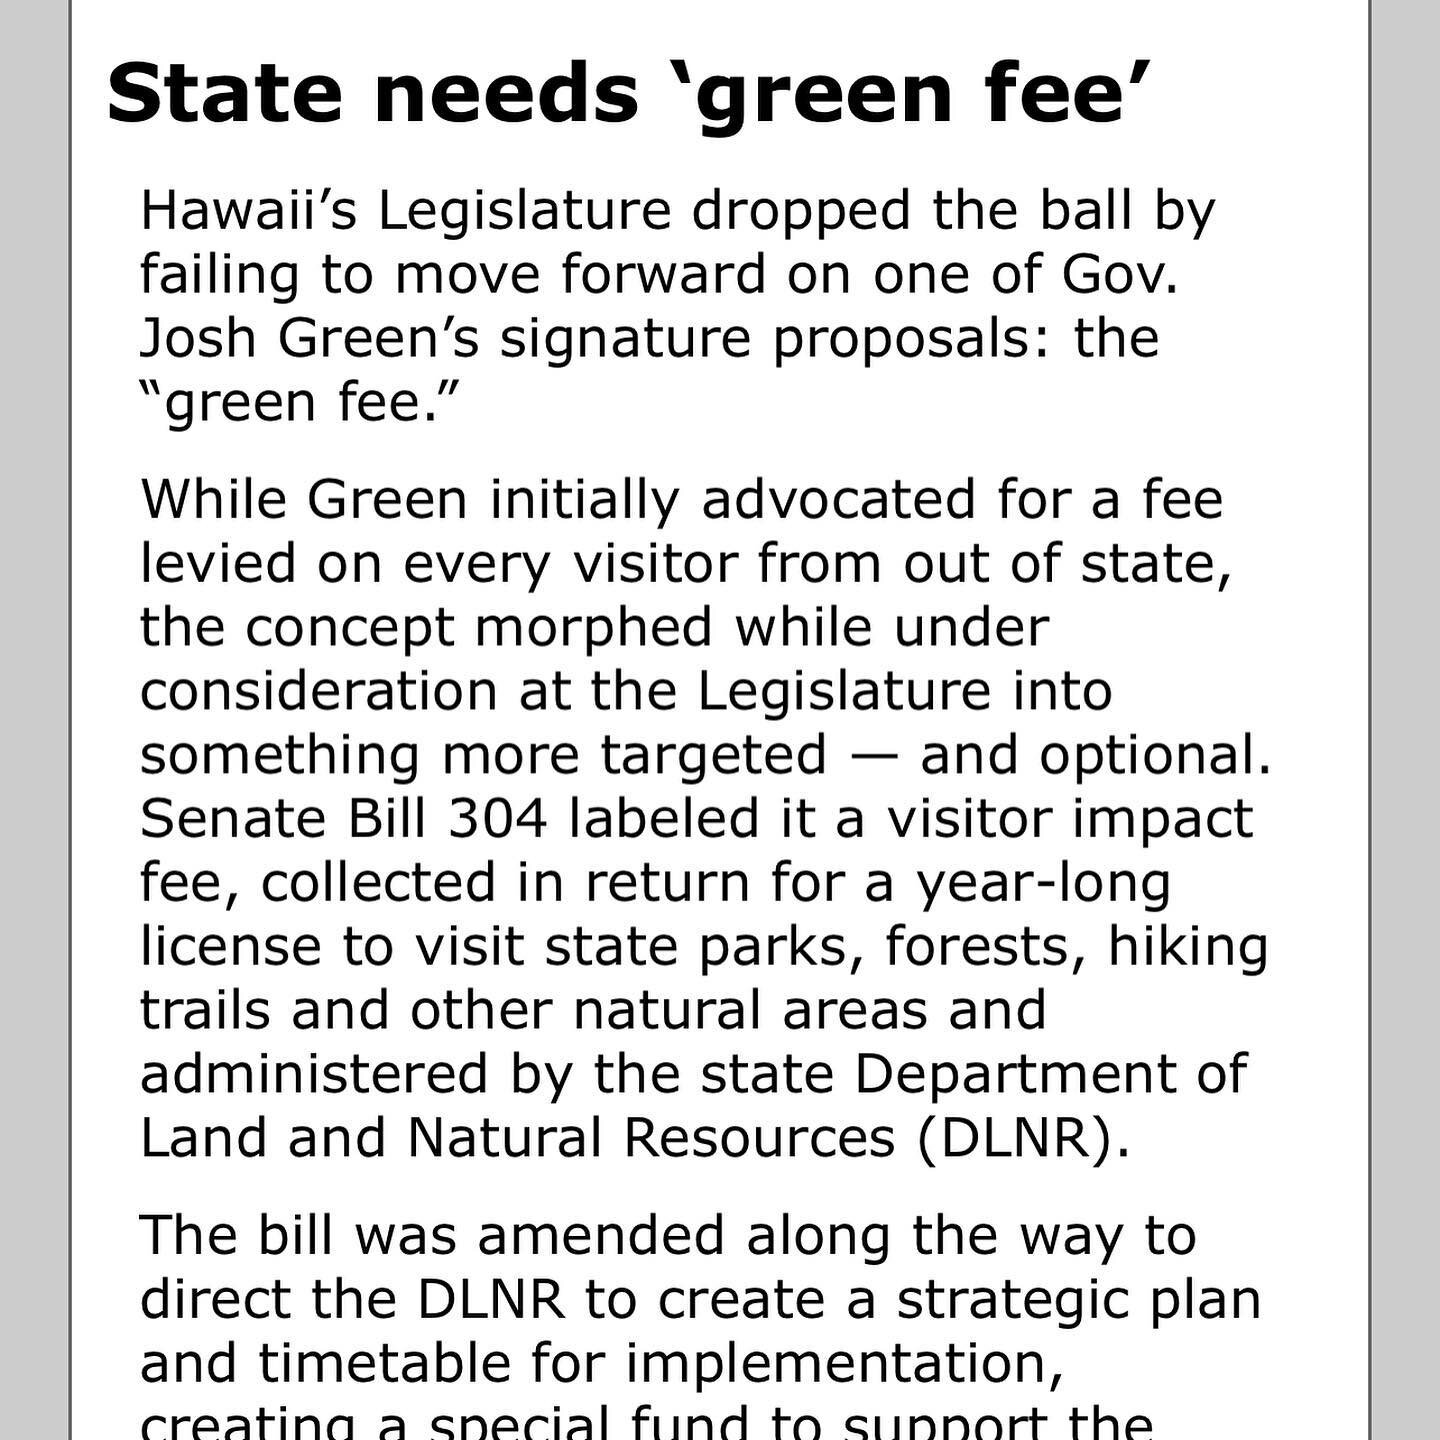 Todays @staradvertiser editorial piece discusses the green fee, after polling their readers this week on support. 

&ldquo;Sure, the visitor fee will certainly be revived next session. It has wide support &mdash; in fact, a January survey found that 